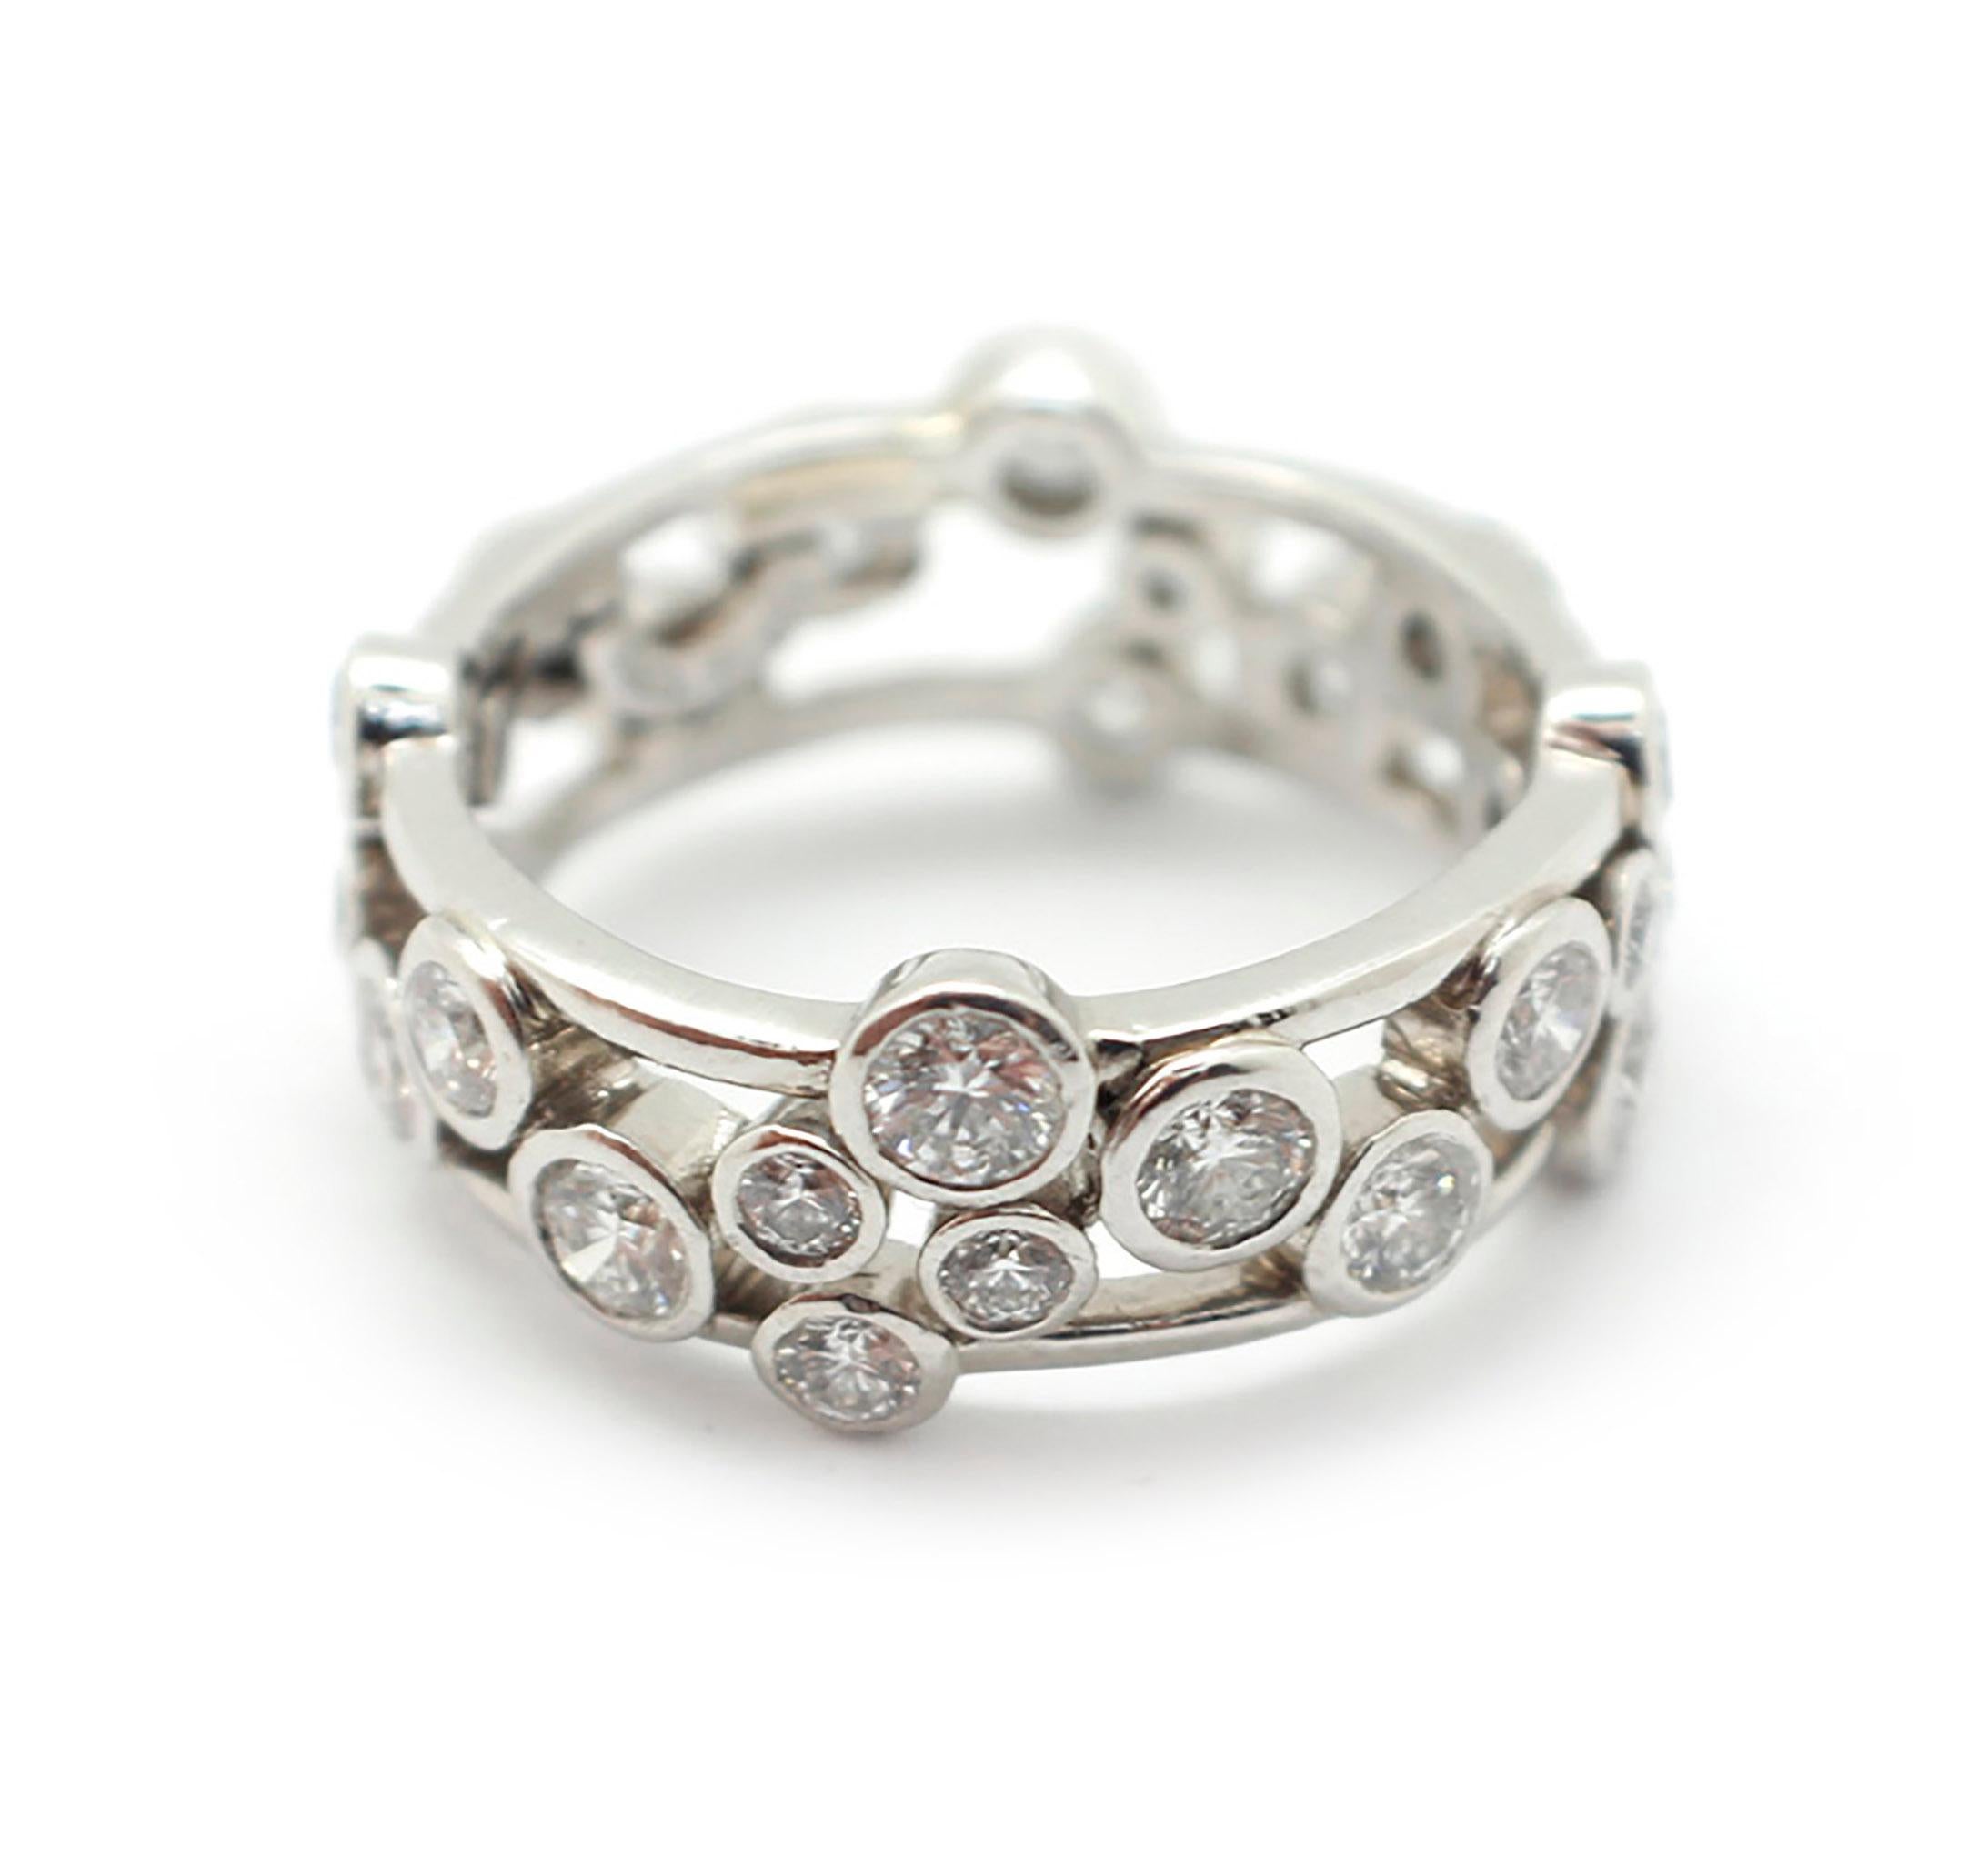 The band style ring is crafted in platinum by designer Tiffany & Co. It features bezel set, round brilliant-cut diamonds all around. The diamonds have a total weight of 1.60ct and are graded G in color and VS in clarity. The ring measures 4.5mm wide